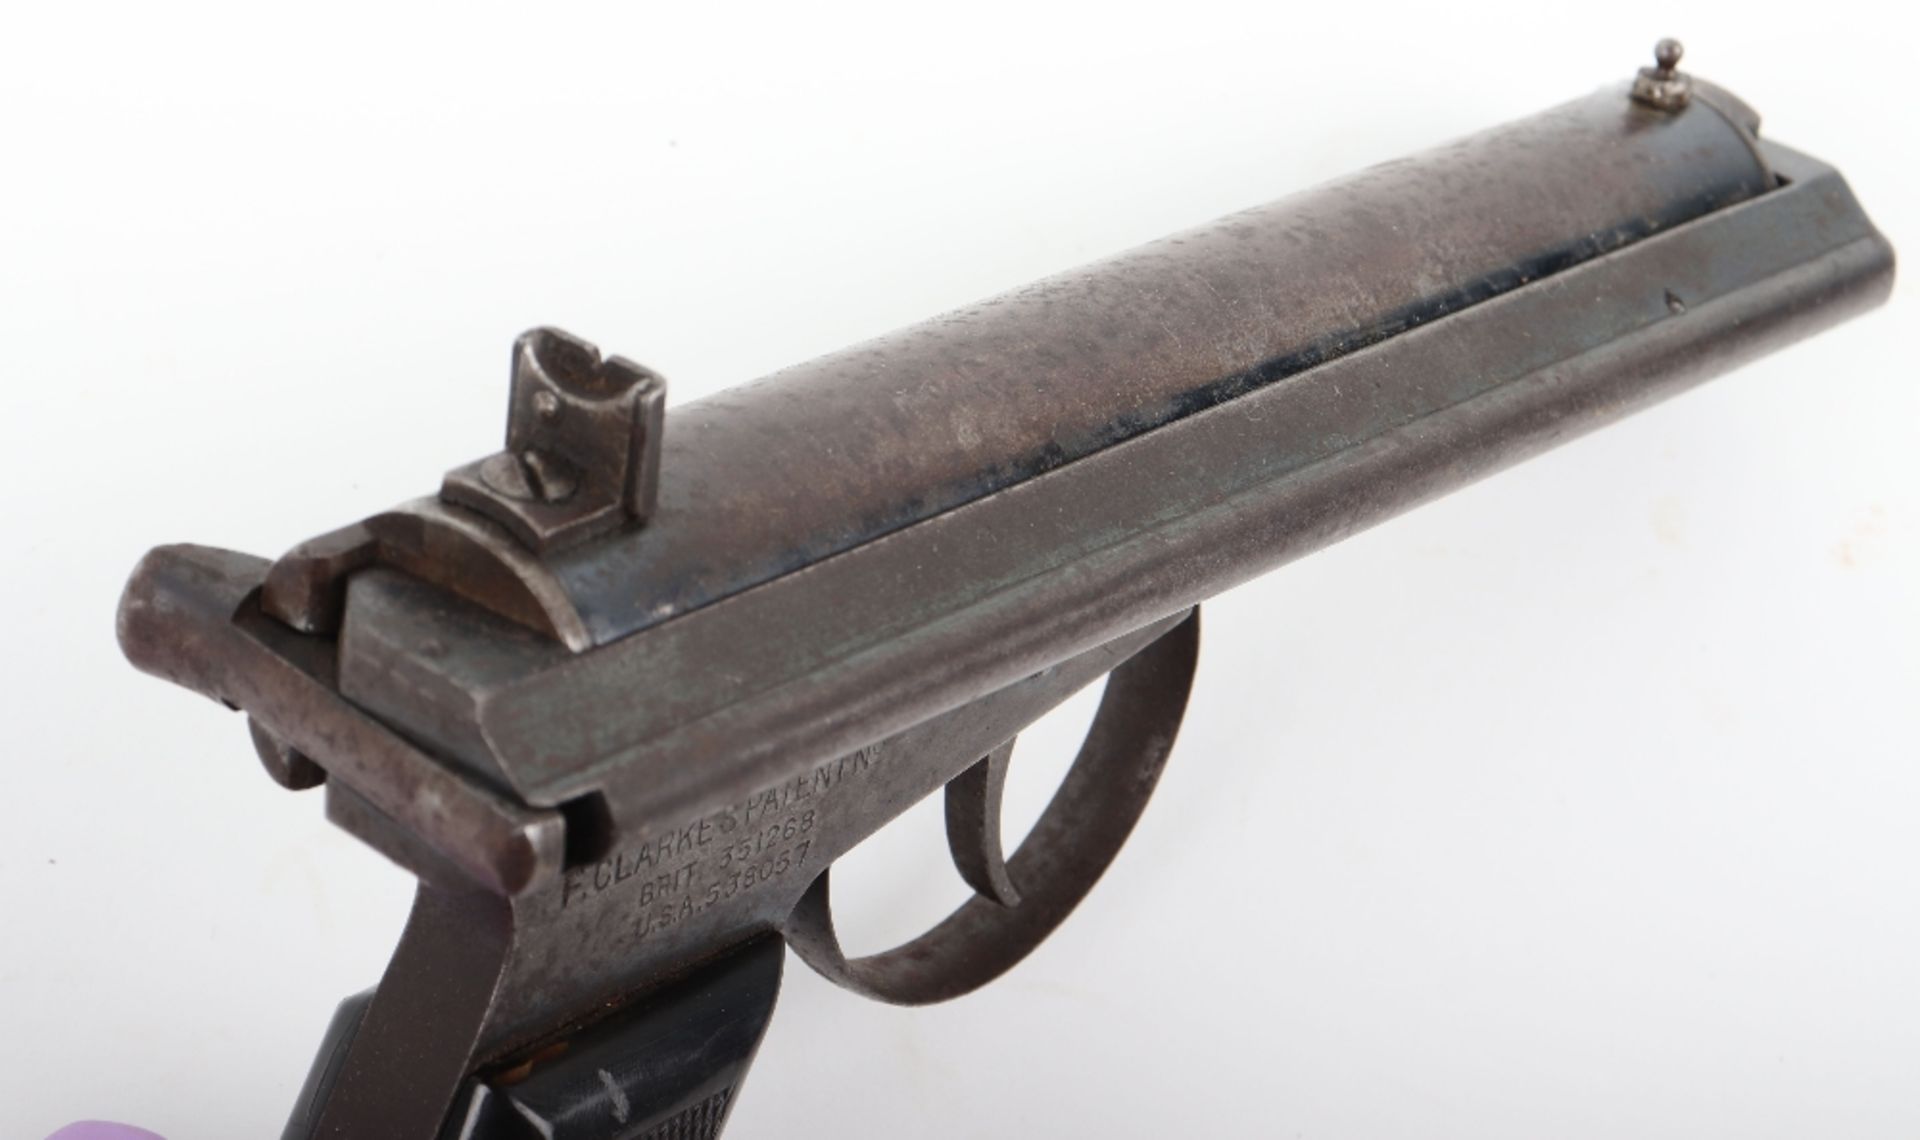 Scarce .22” Warrior Side-Lever Cocking Air Pistol No. 1921 - Image 4 of 8